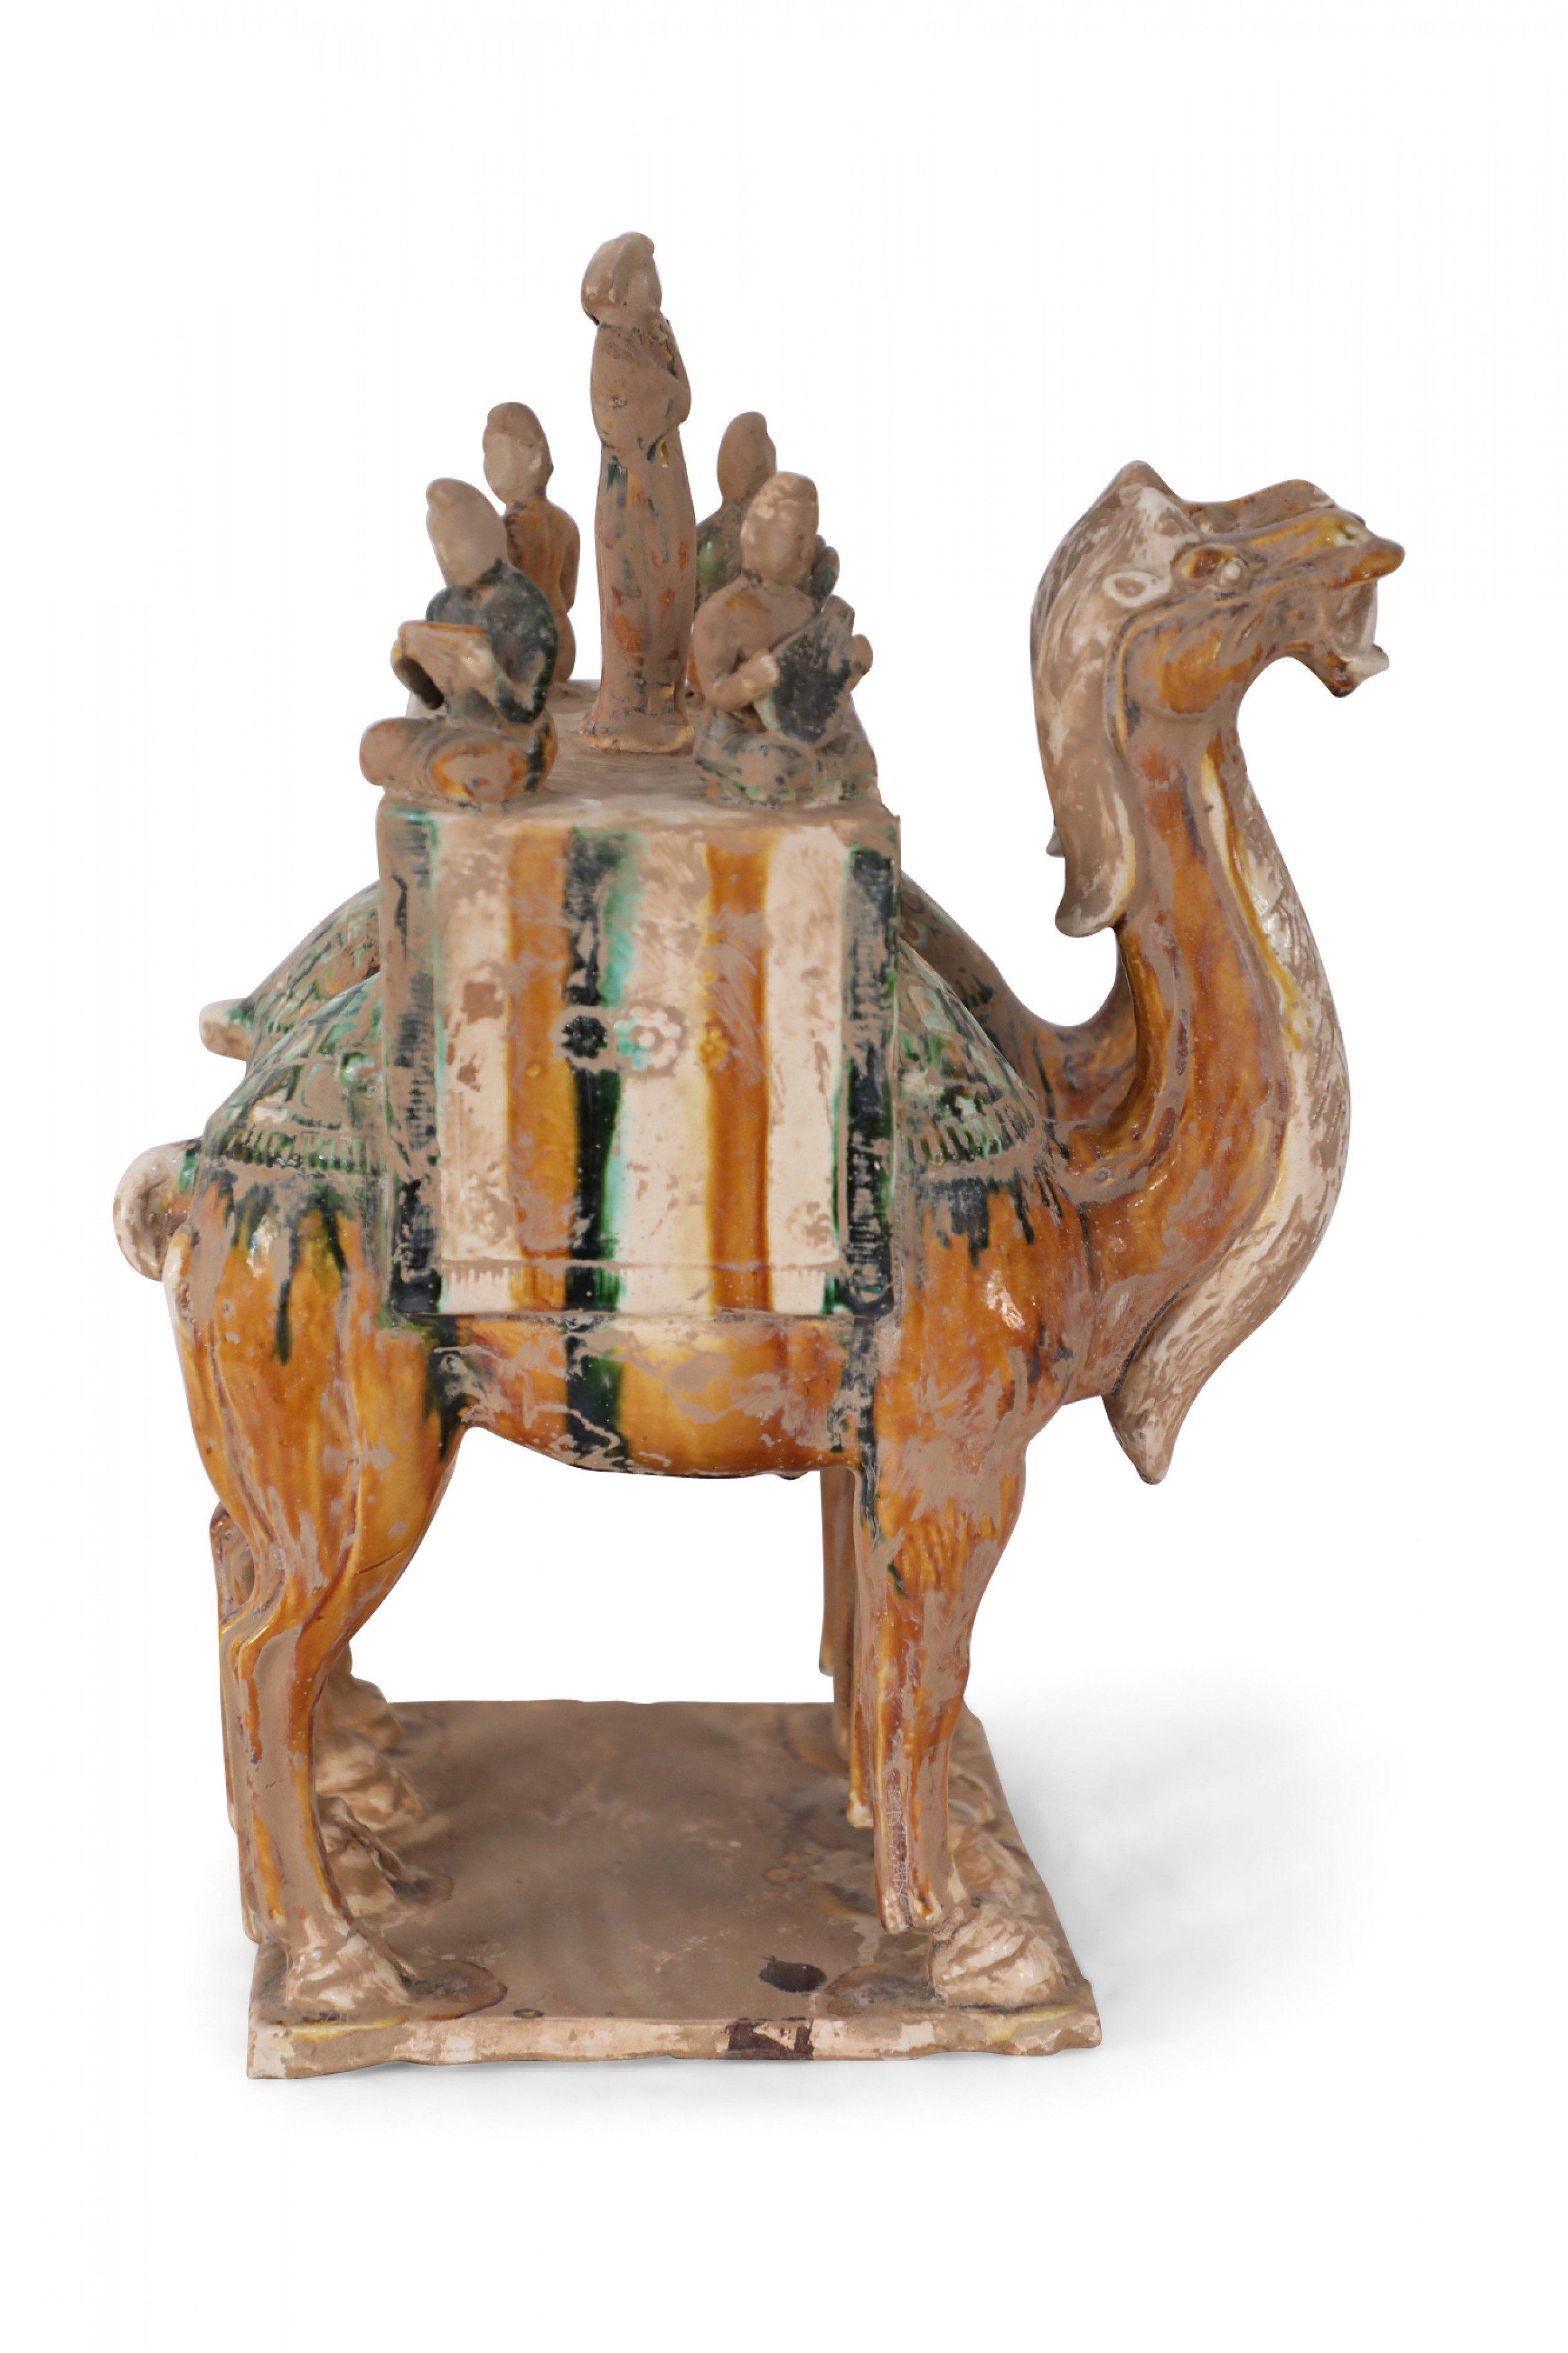 20th Century Chinese Tang Dynasty-Style Sancai Glazed Camels with Musicians Tomb Figure For Sale